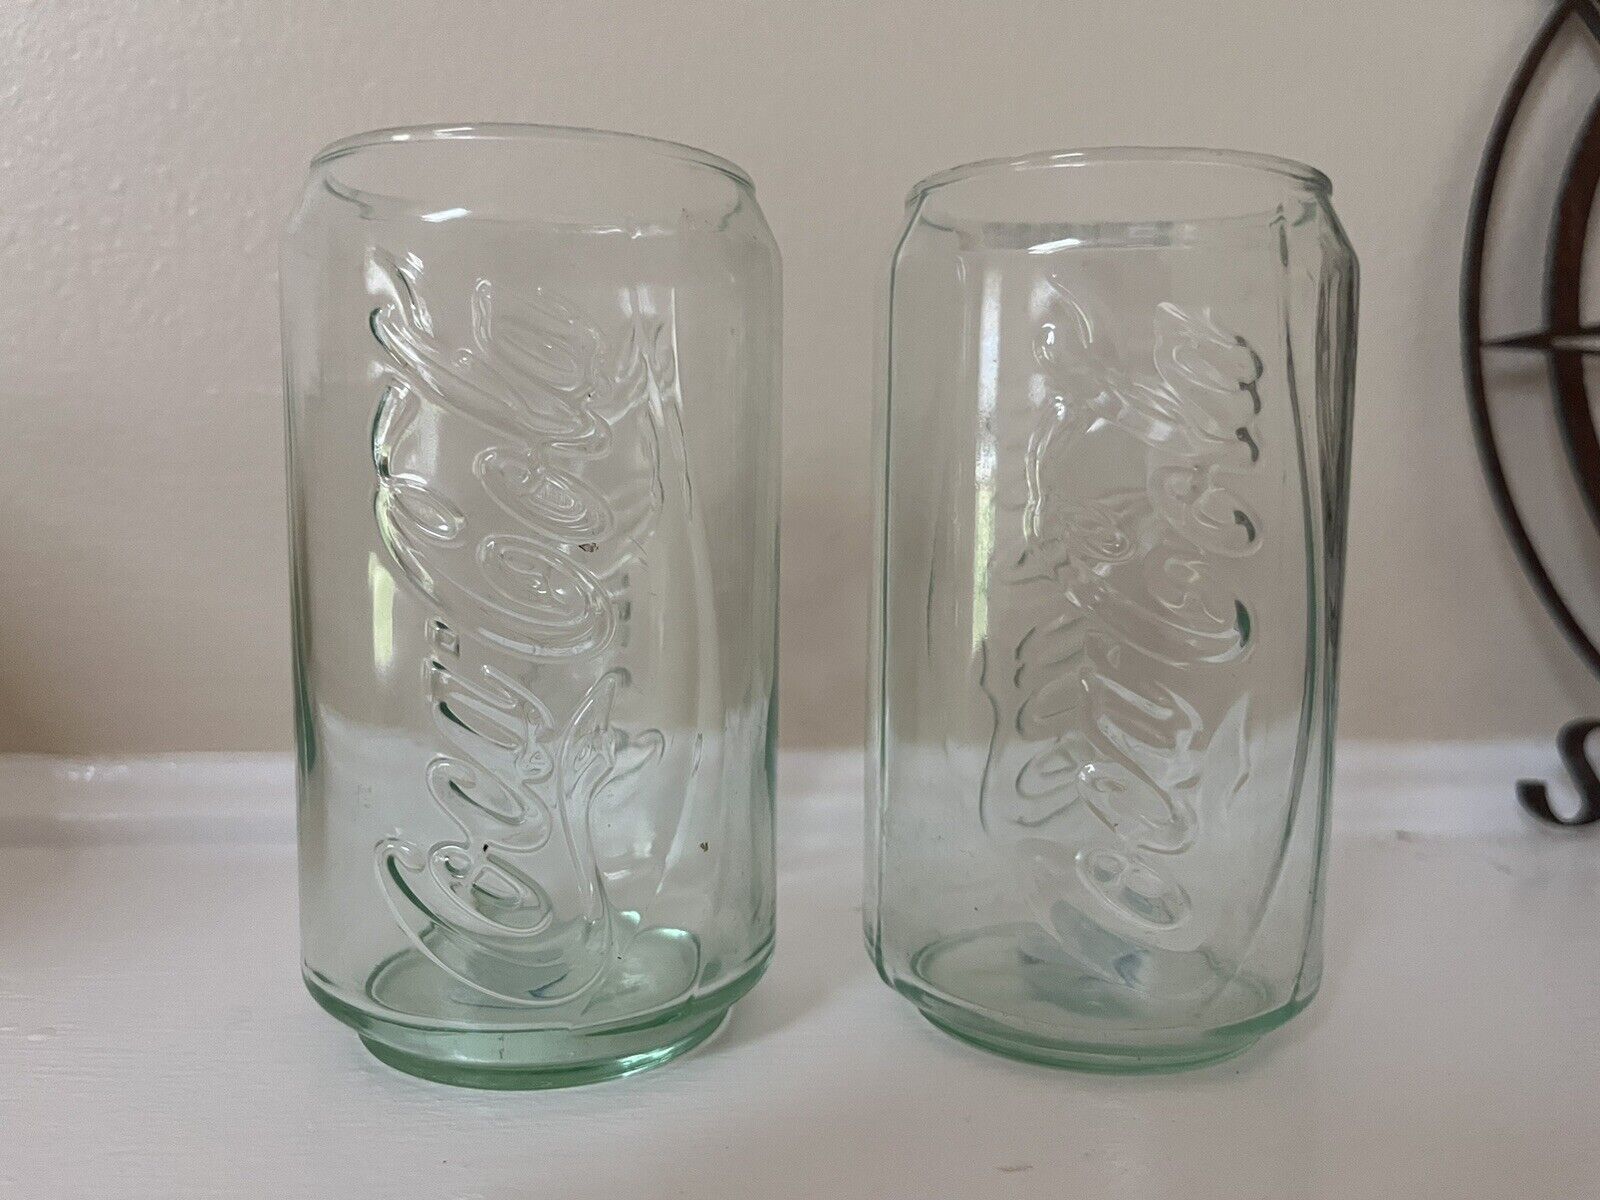 Vintage Coke, Coca Cola Can Shaped Glasses 2 pack Green Tint